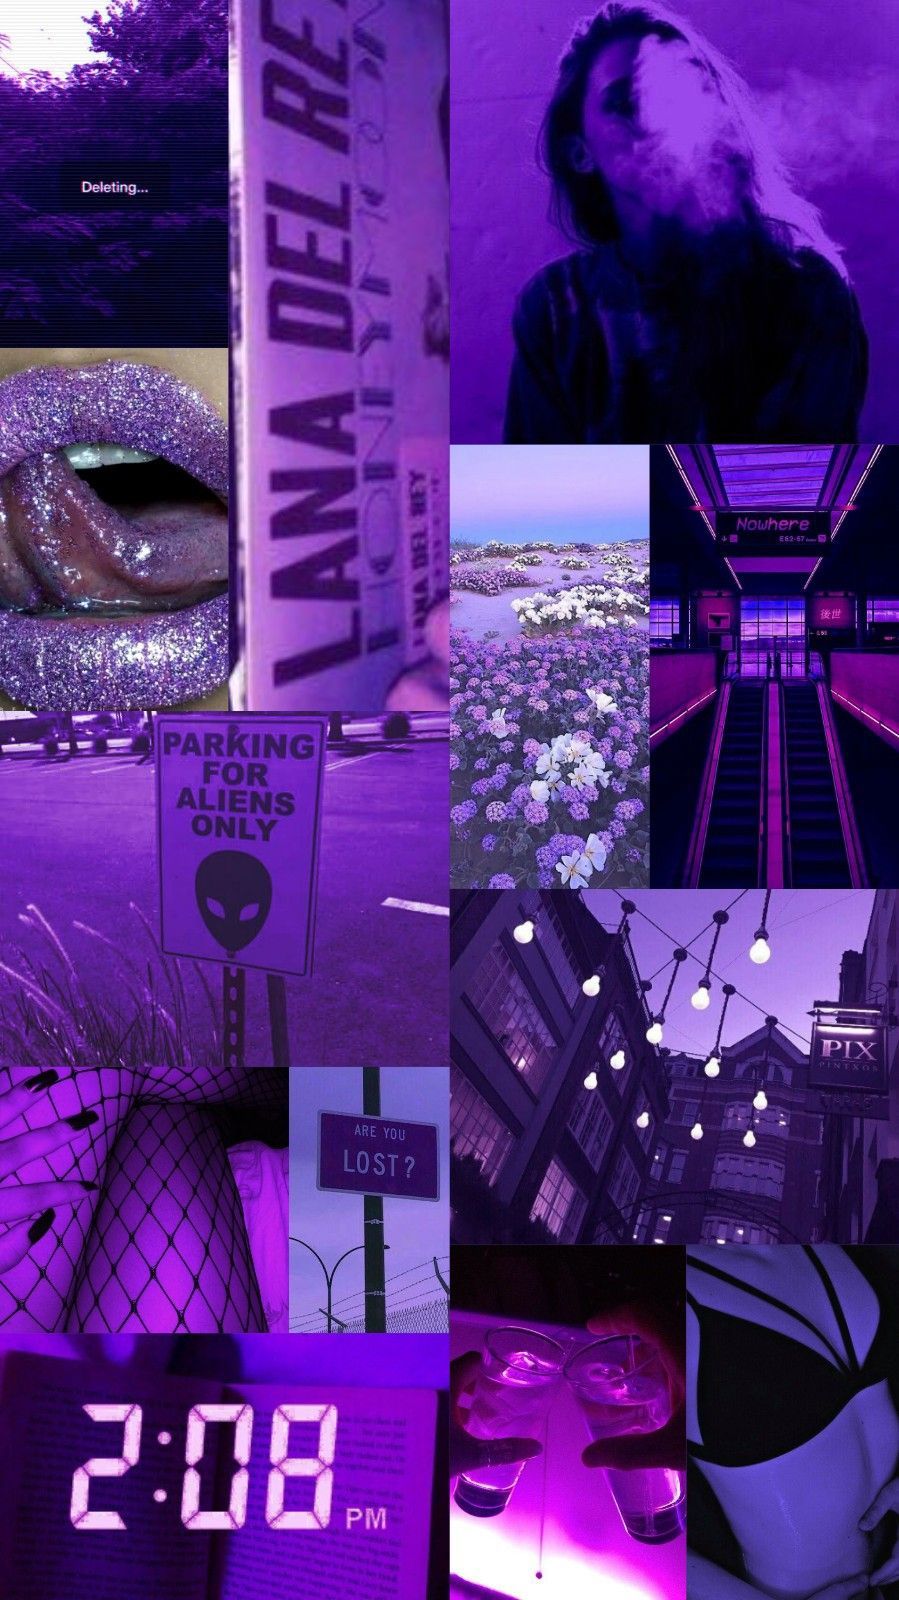 Aesthetic collage of purple photos including a woman, a city, and a clock. - Lana Del Rey